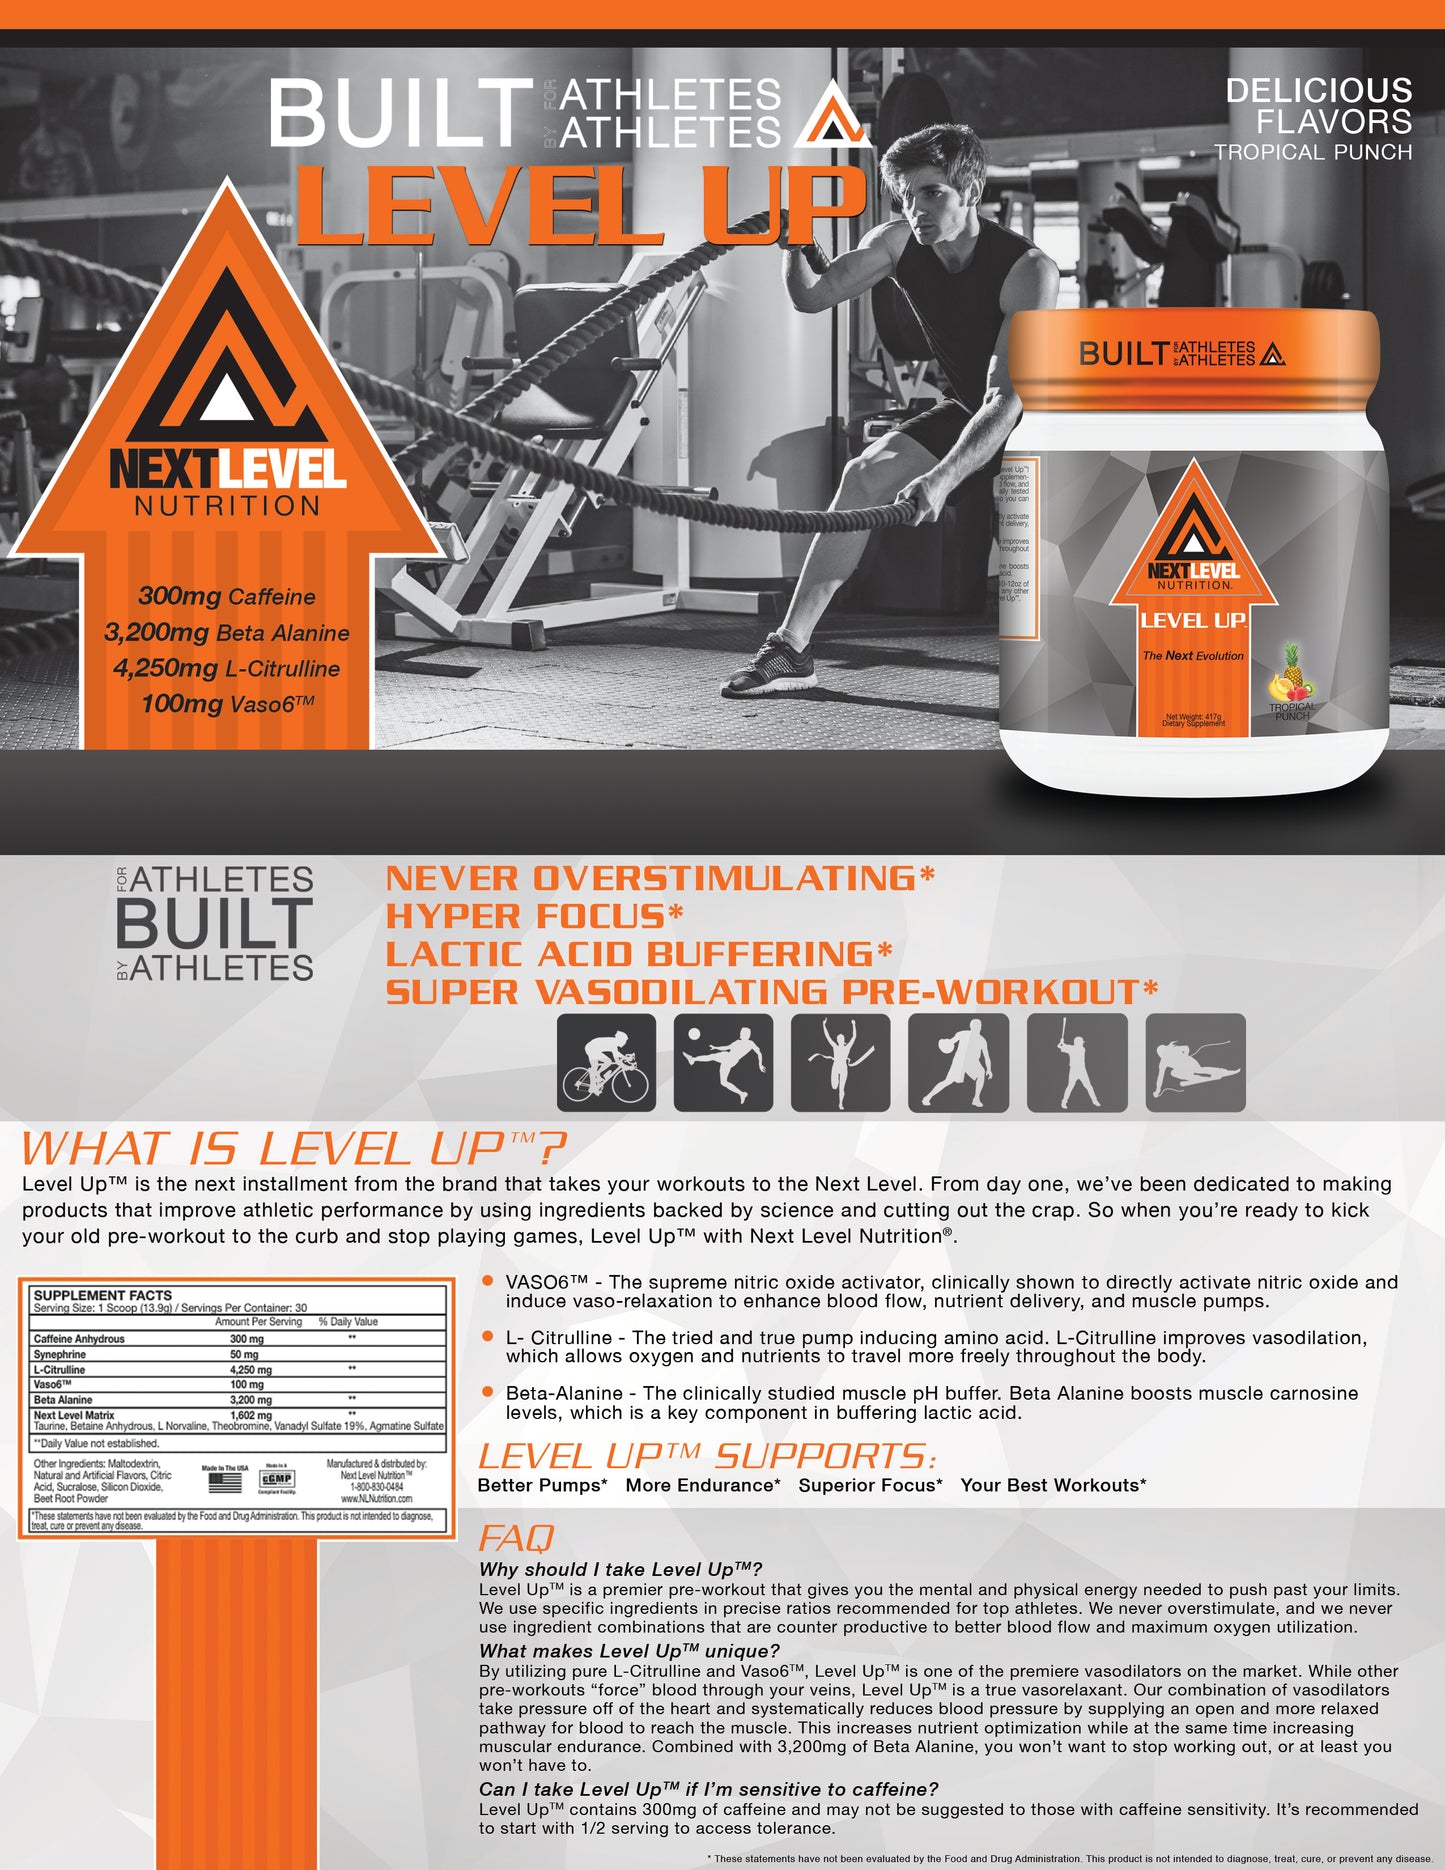 Level Up Pre Workout | Increase Intensity & Focus | 30 Servings